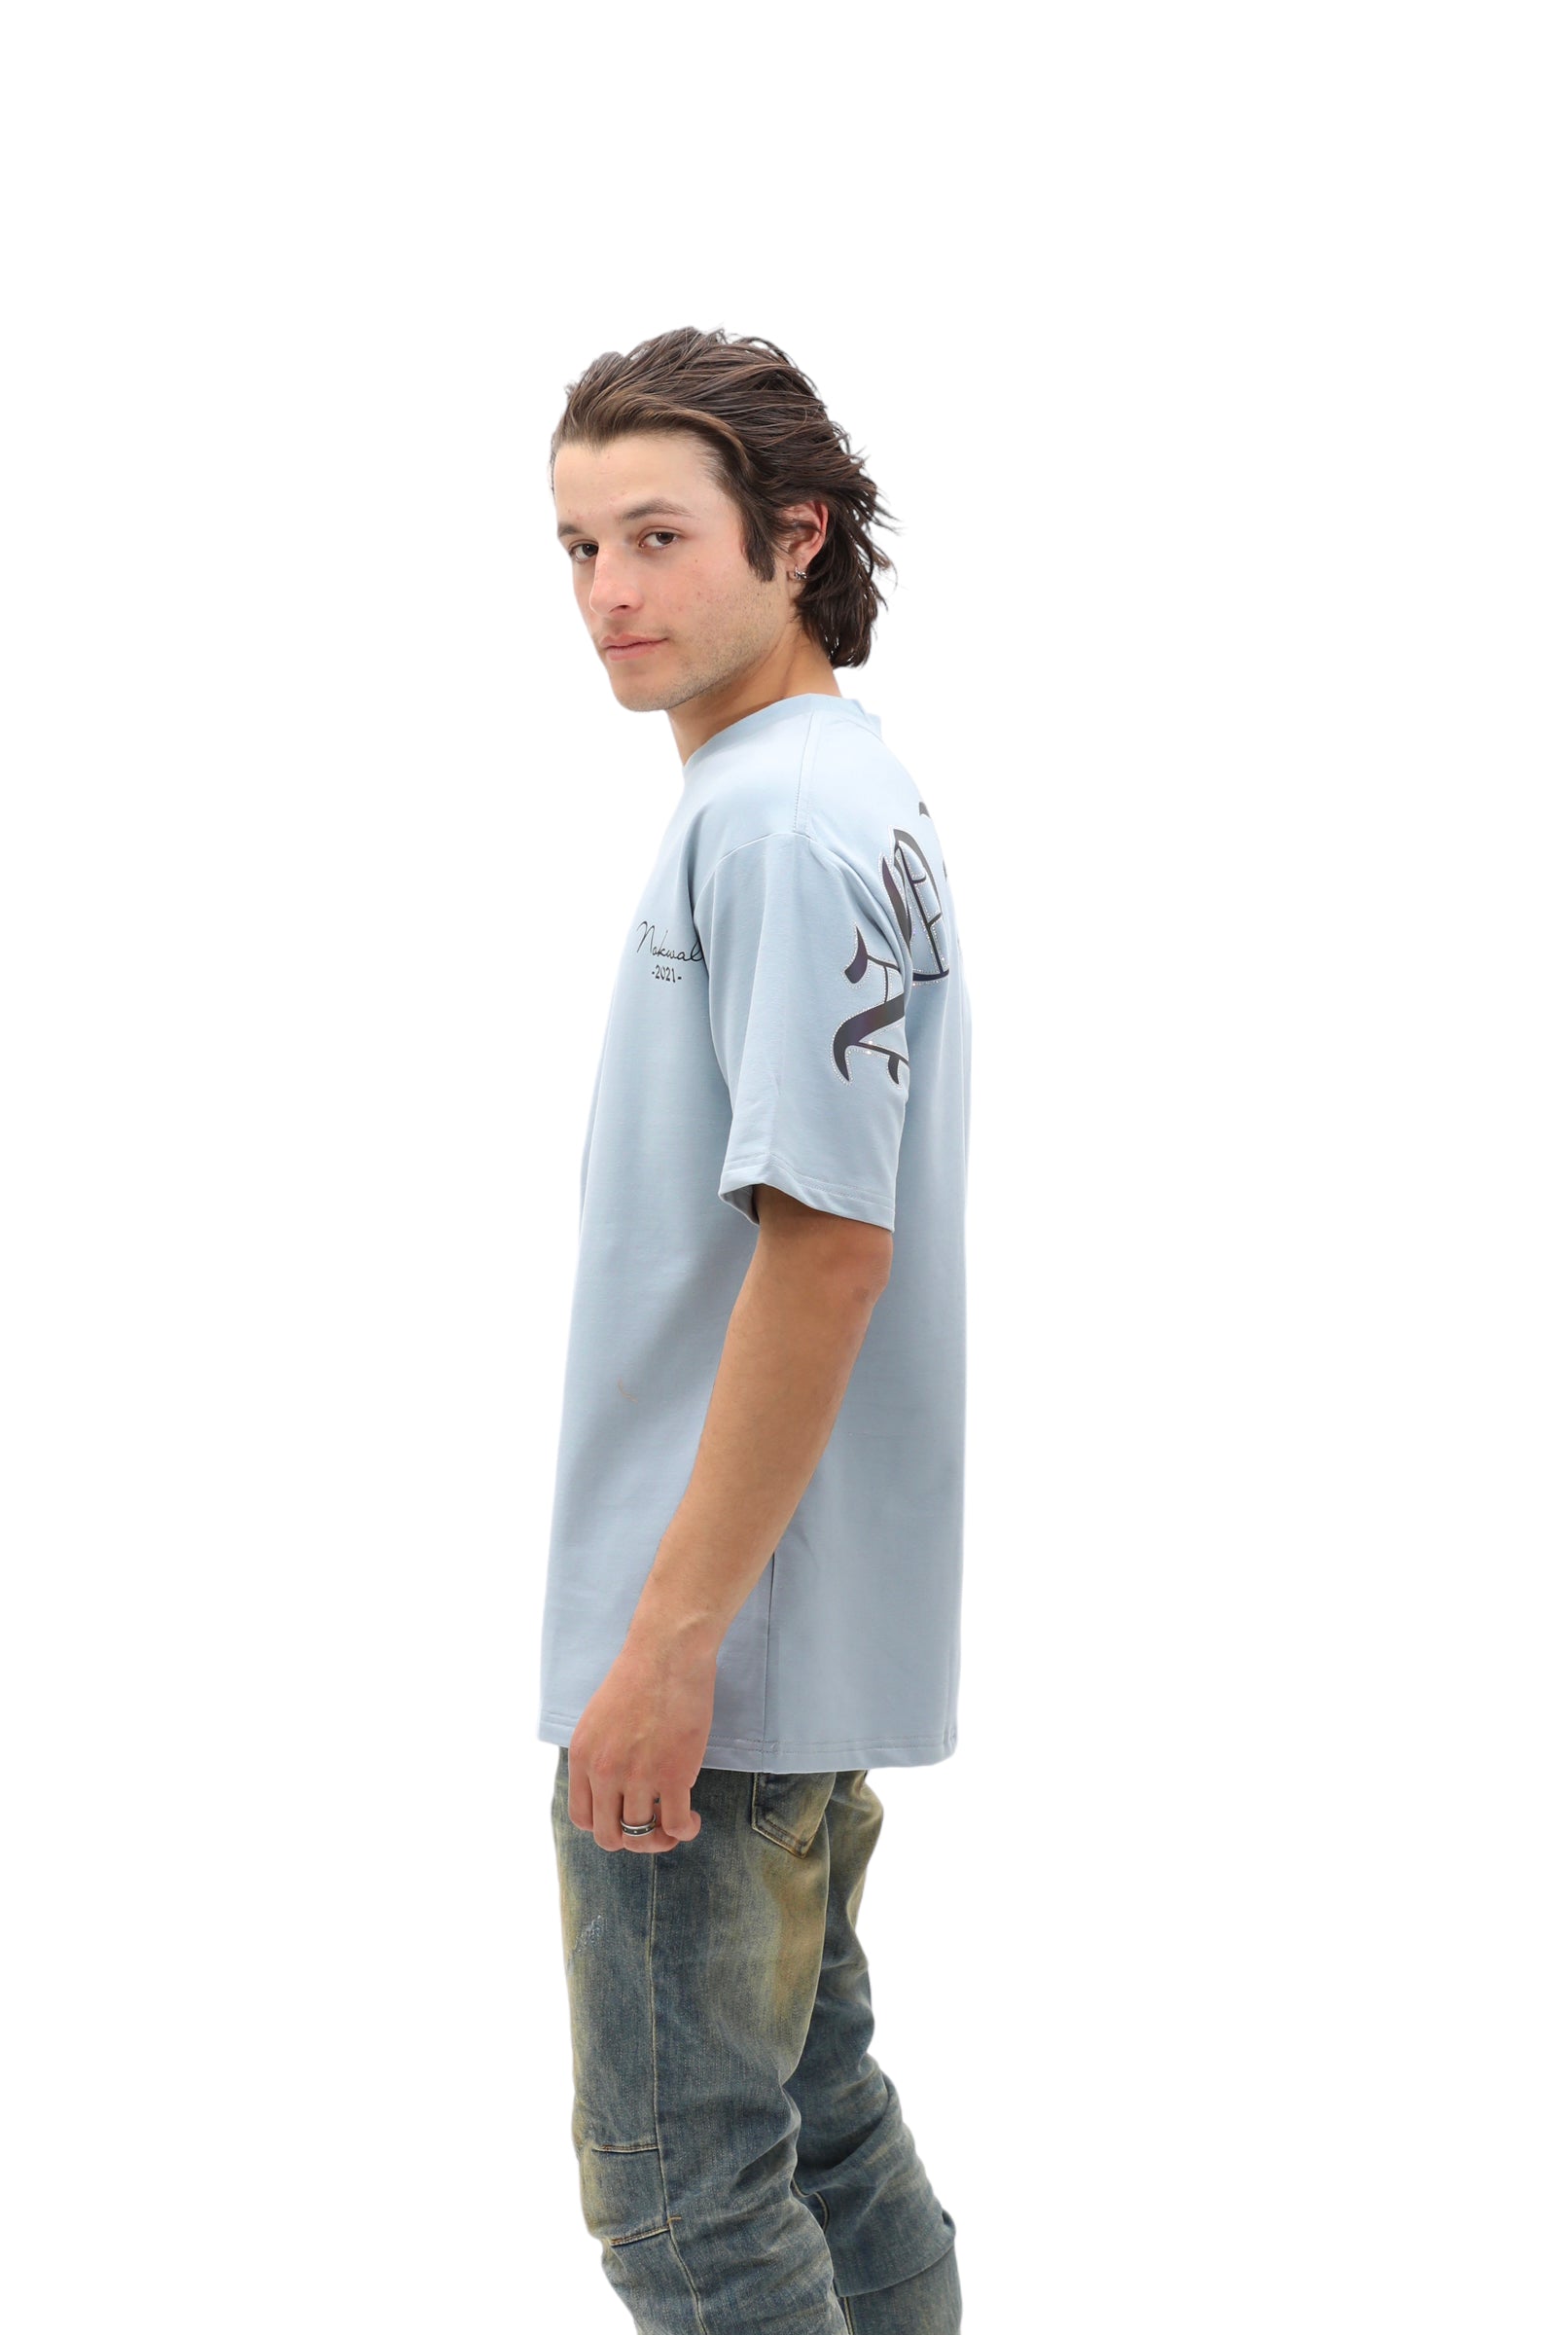 Damaged Soul From Pain - Reflective - T-Shirt - Faded Light Blue